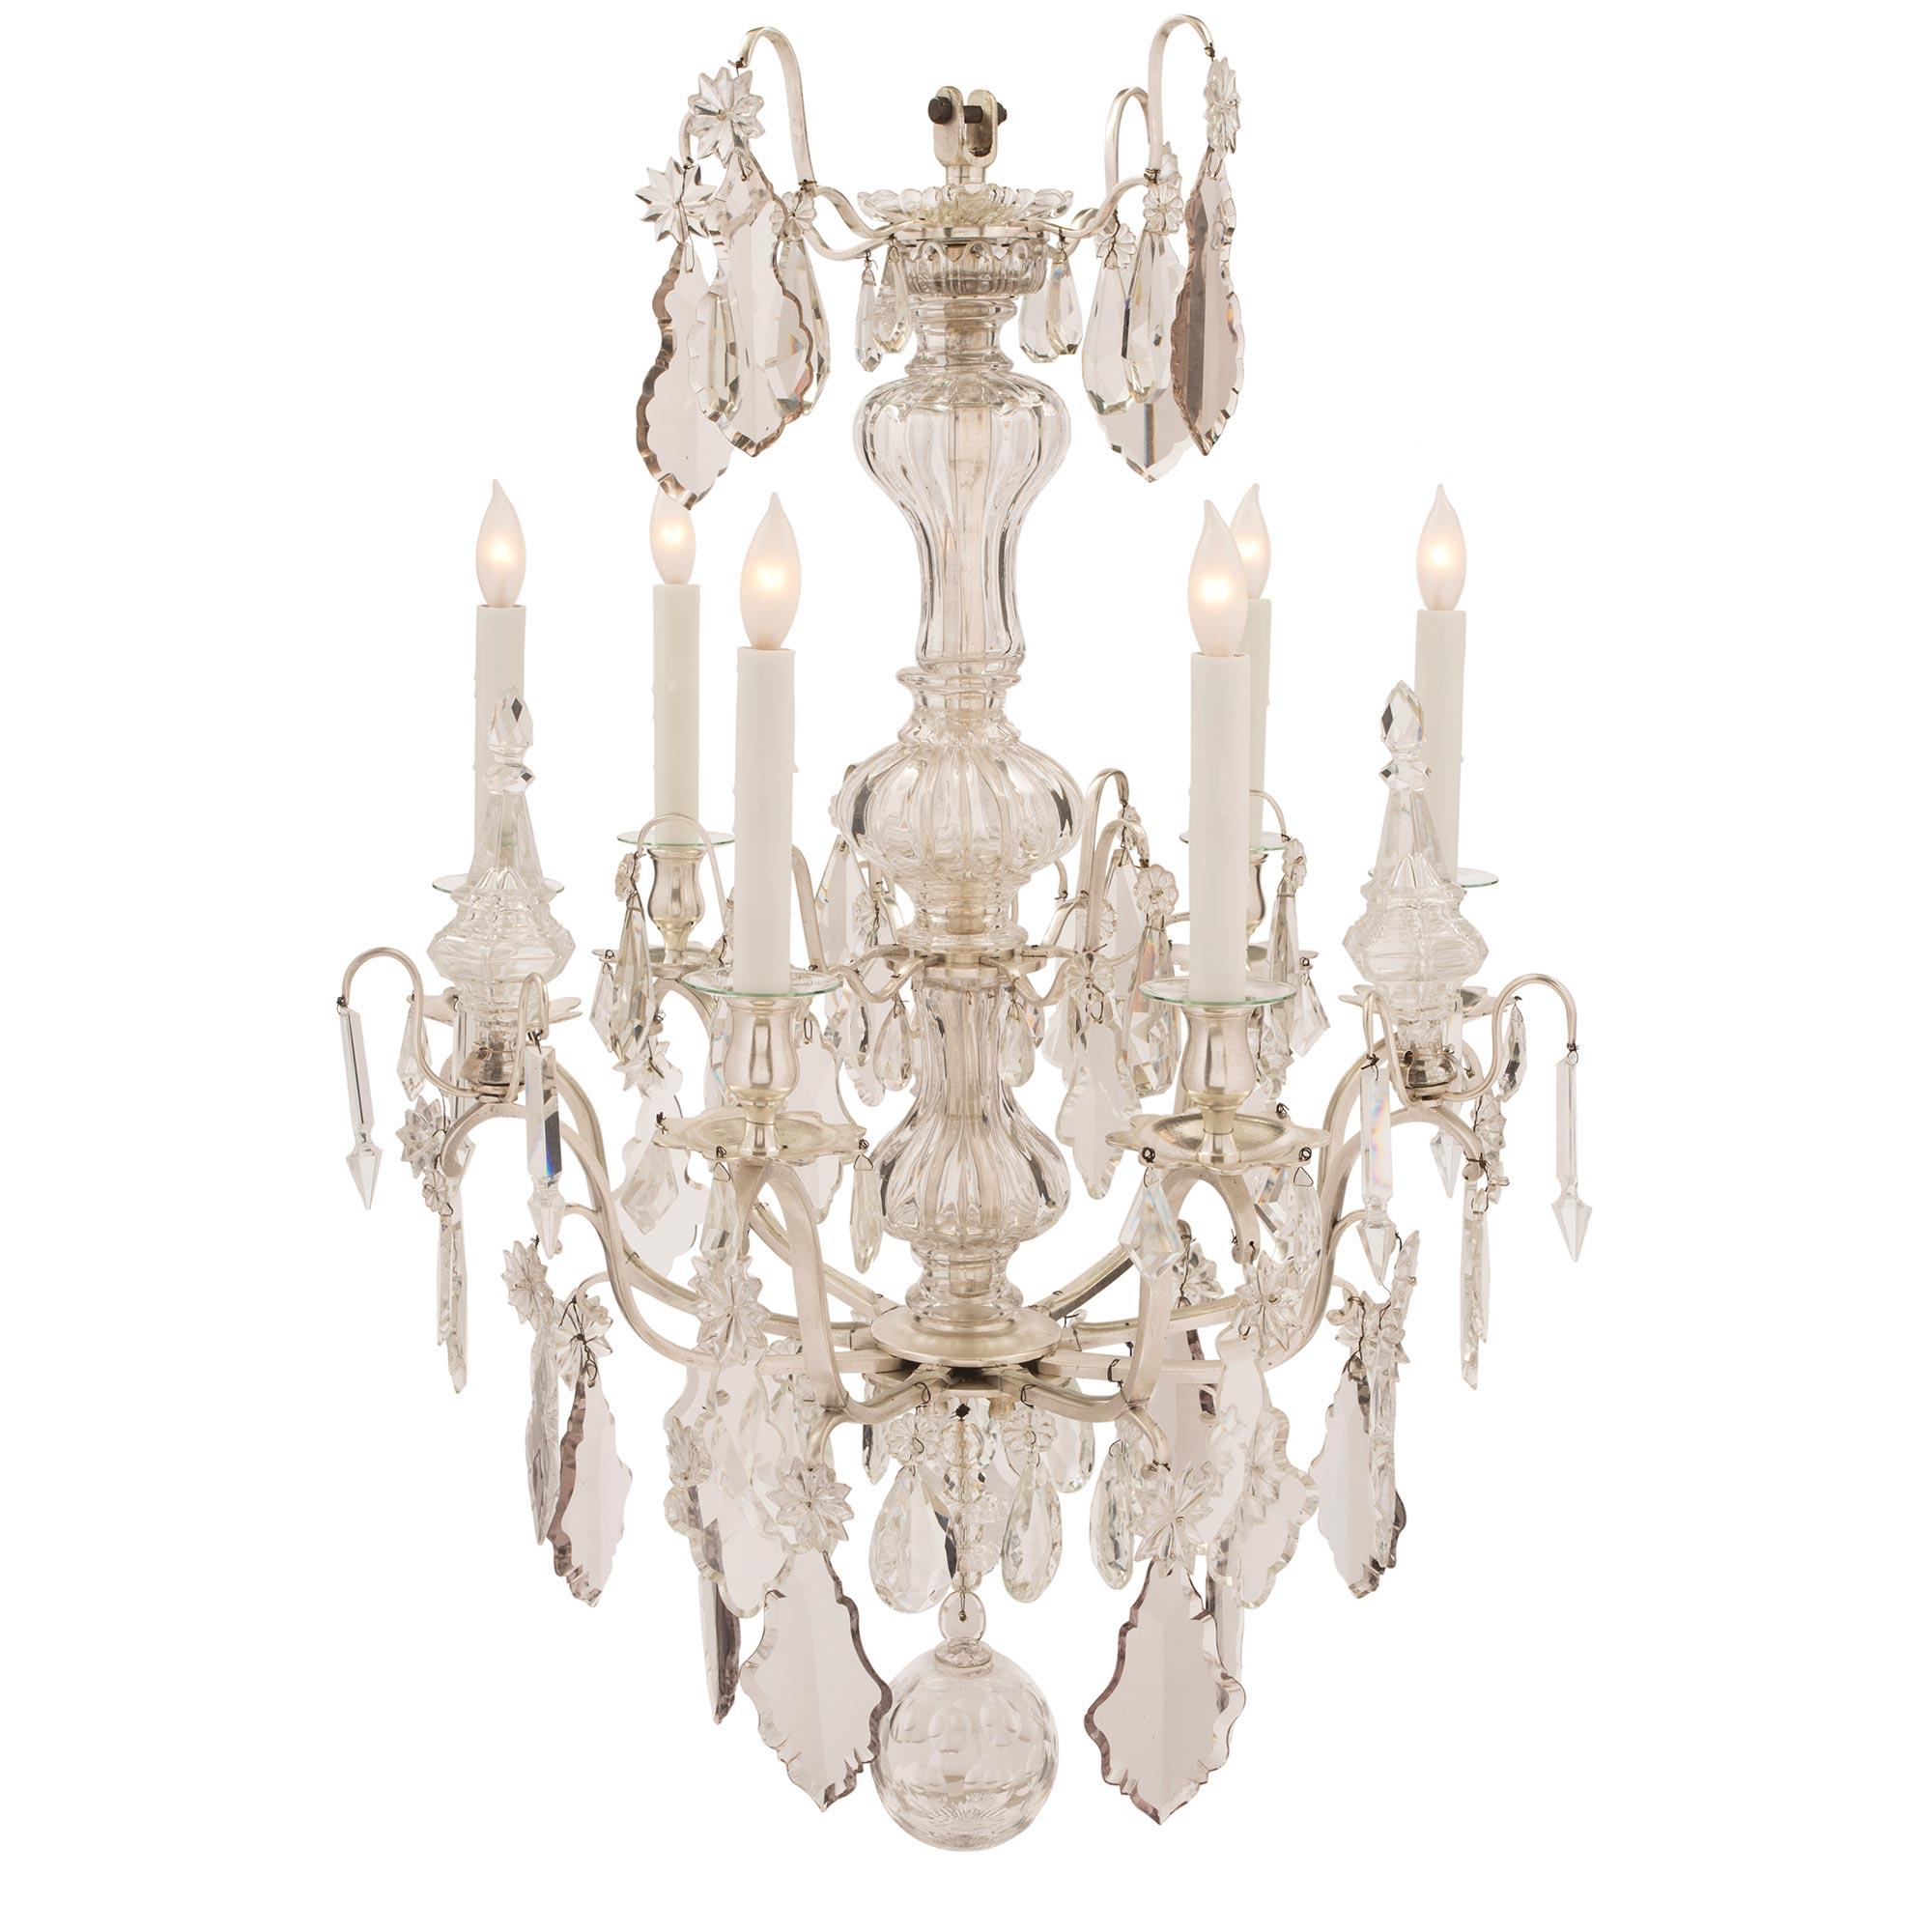 A very attractive and high quality French mid 19th century Louis XV st. silvered bronze and Baccarat crystal, six electrified arm chandelier. The chandelier has an elegant central crystal fut and nine 'S' scrolled arms. The arms are decorated by